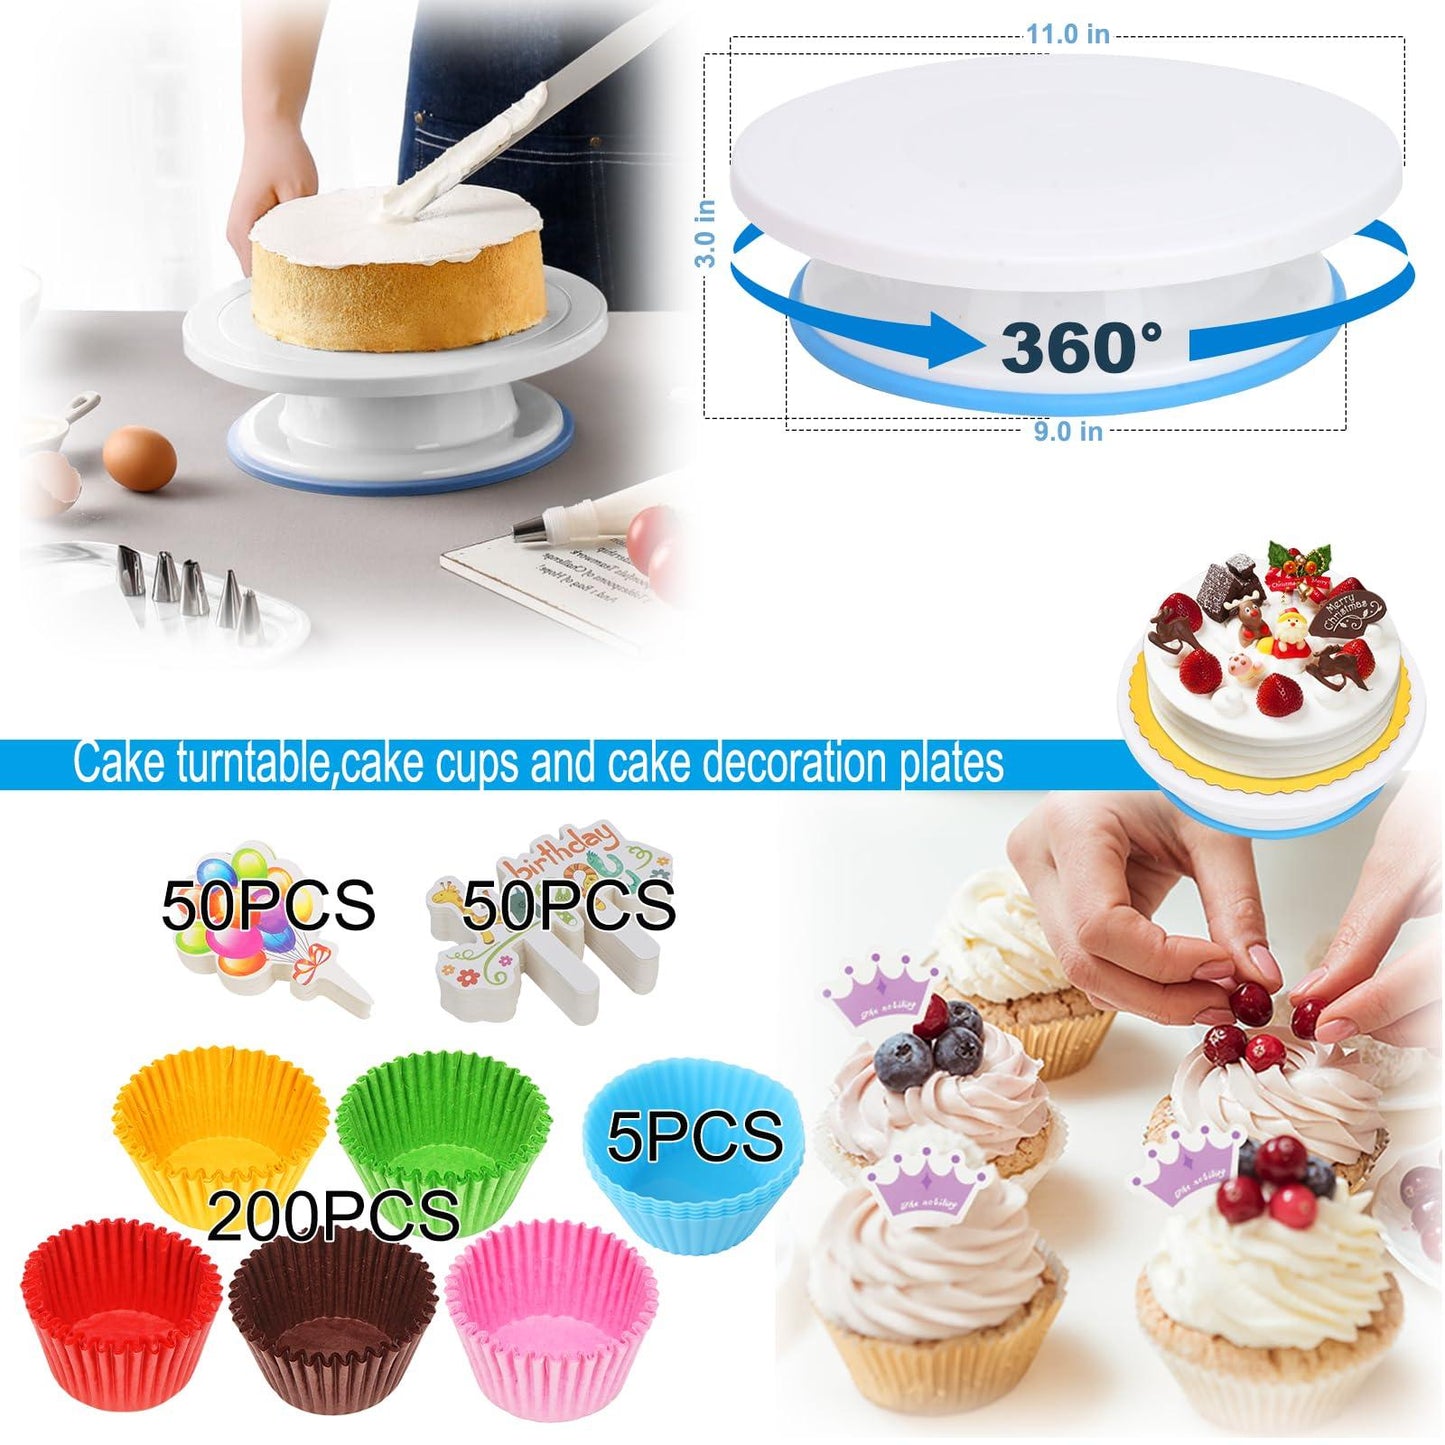 Cake Decorating Kit,637 Pcs Decorating Supplies With 3 Springform Pan Sets Icing Nozzles Rotating Turntable Cake Topper Piping Bags Paper Plates, Cake Baking Set Tools for Beginner and Professional - CookCave